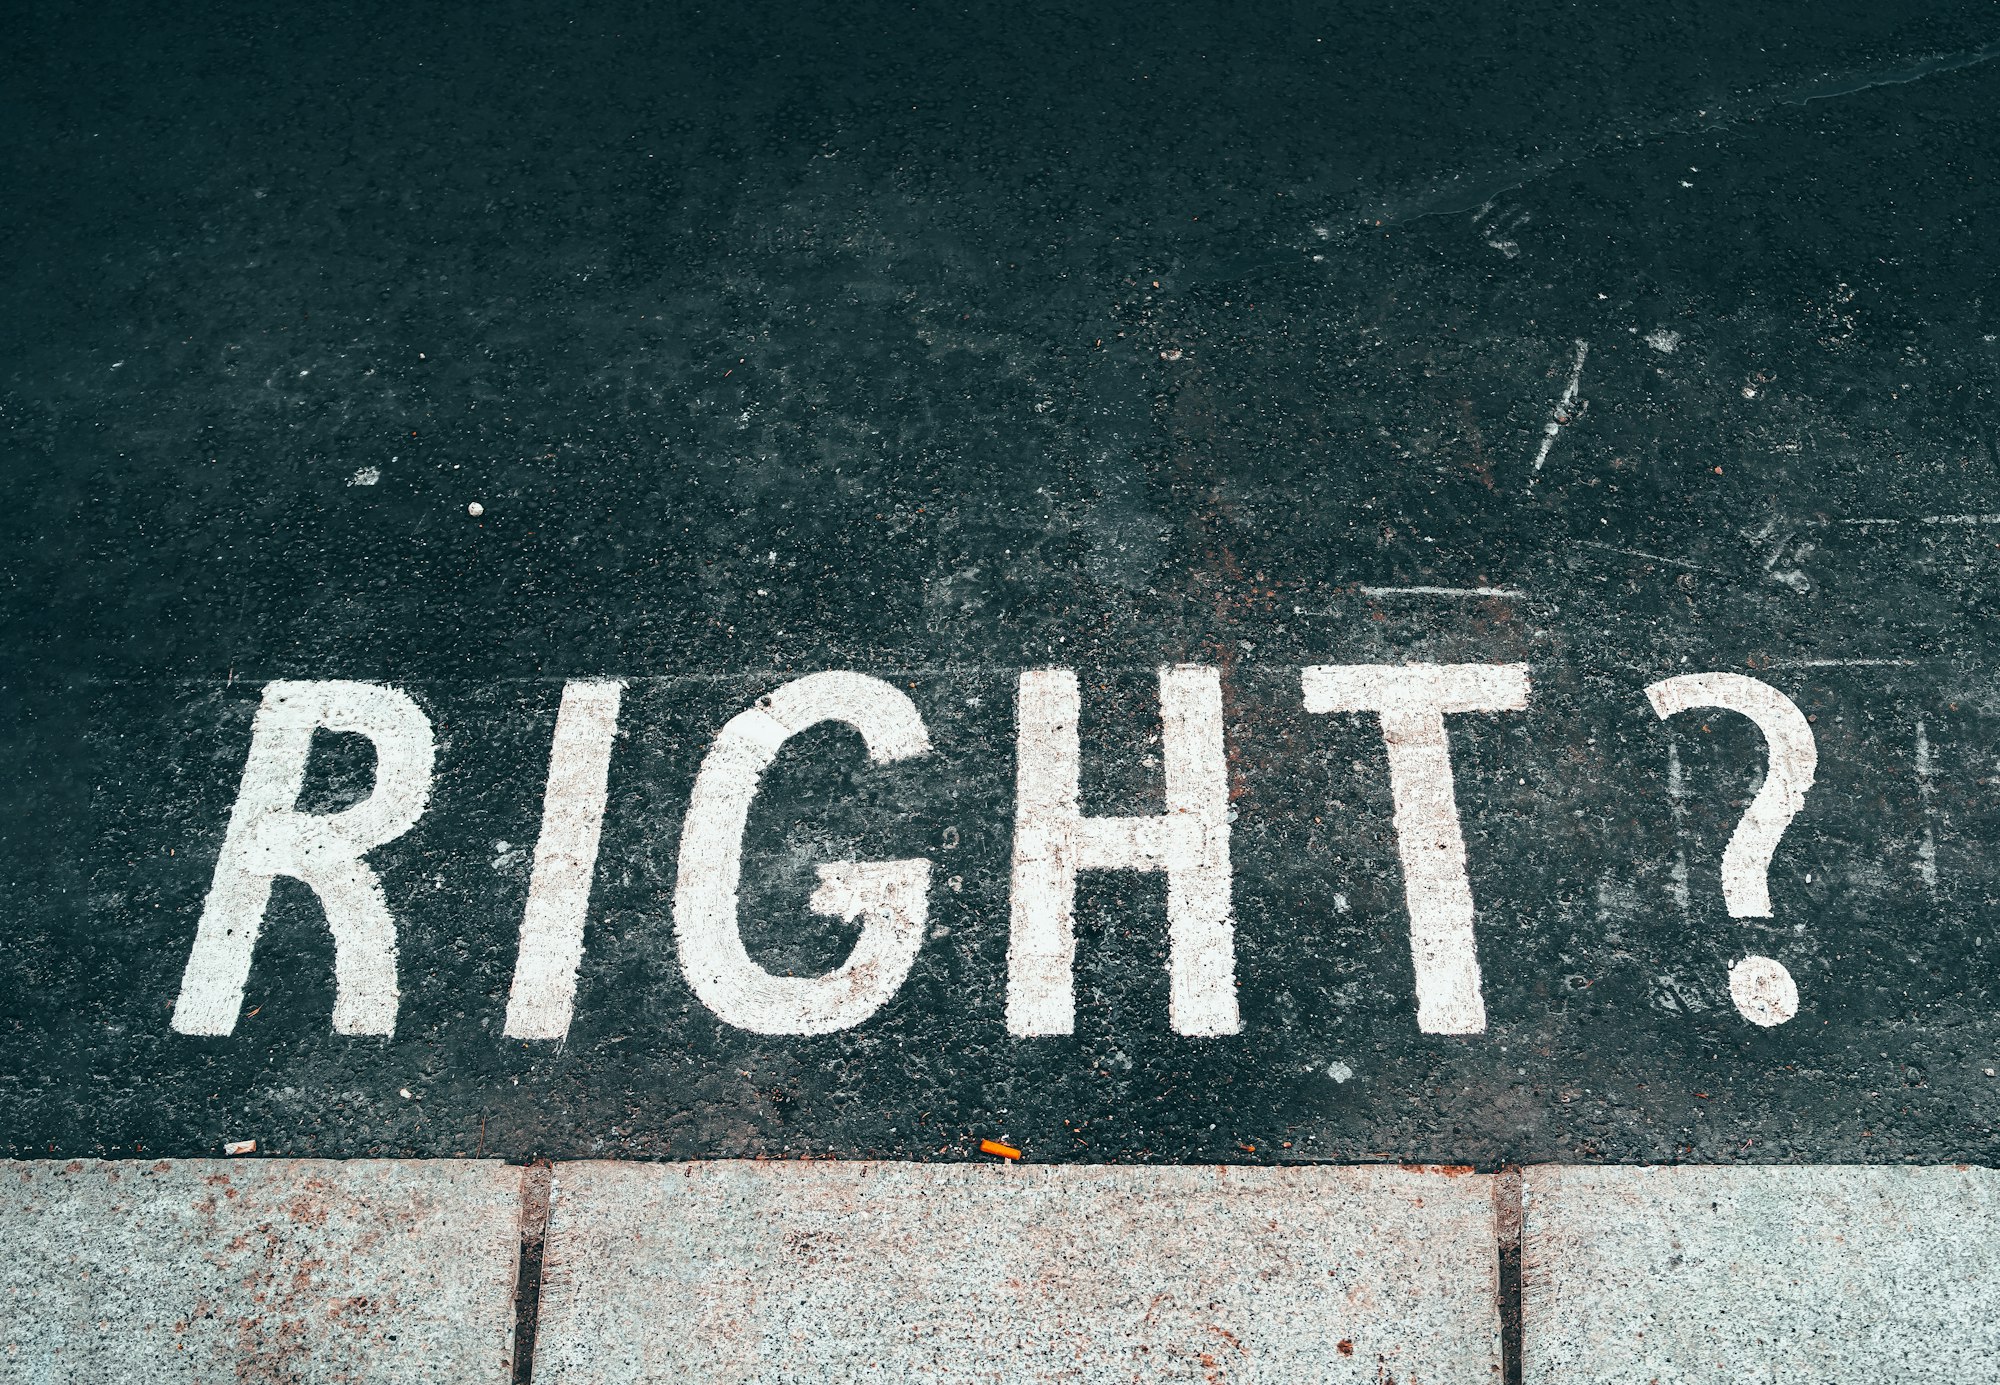 the word "right?" painted on asphalt next to a sidewalk